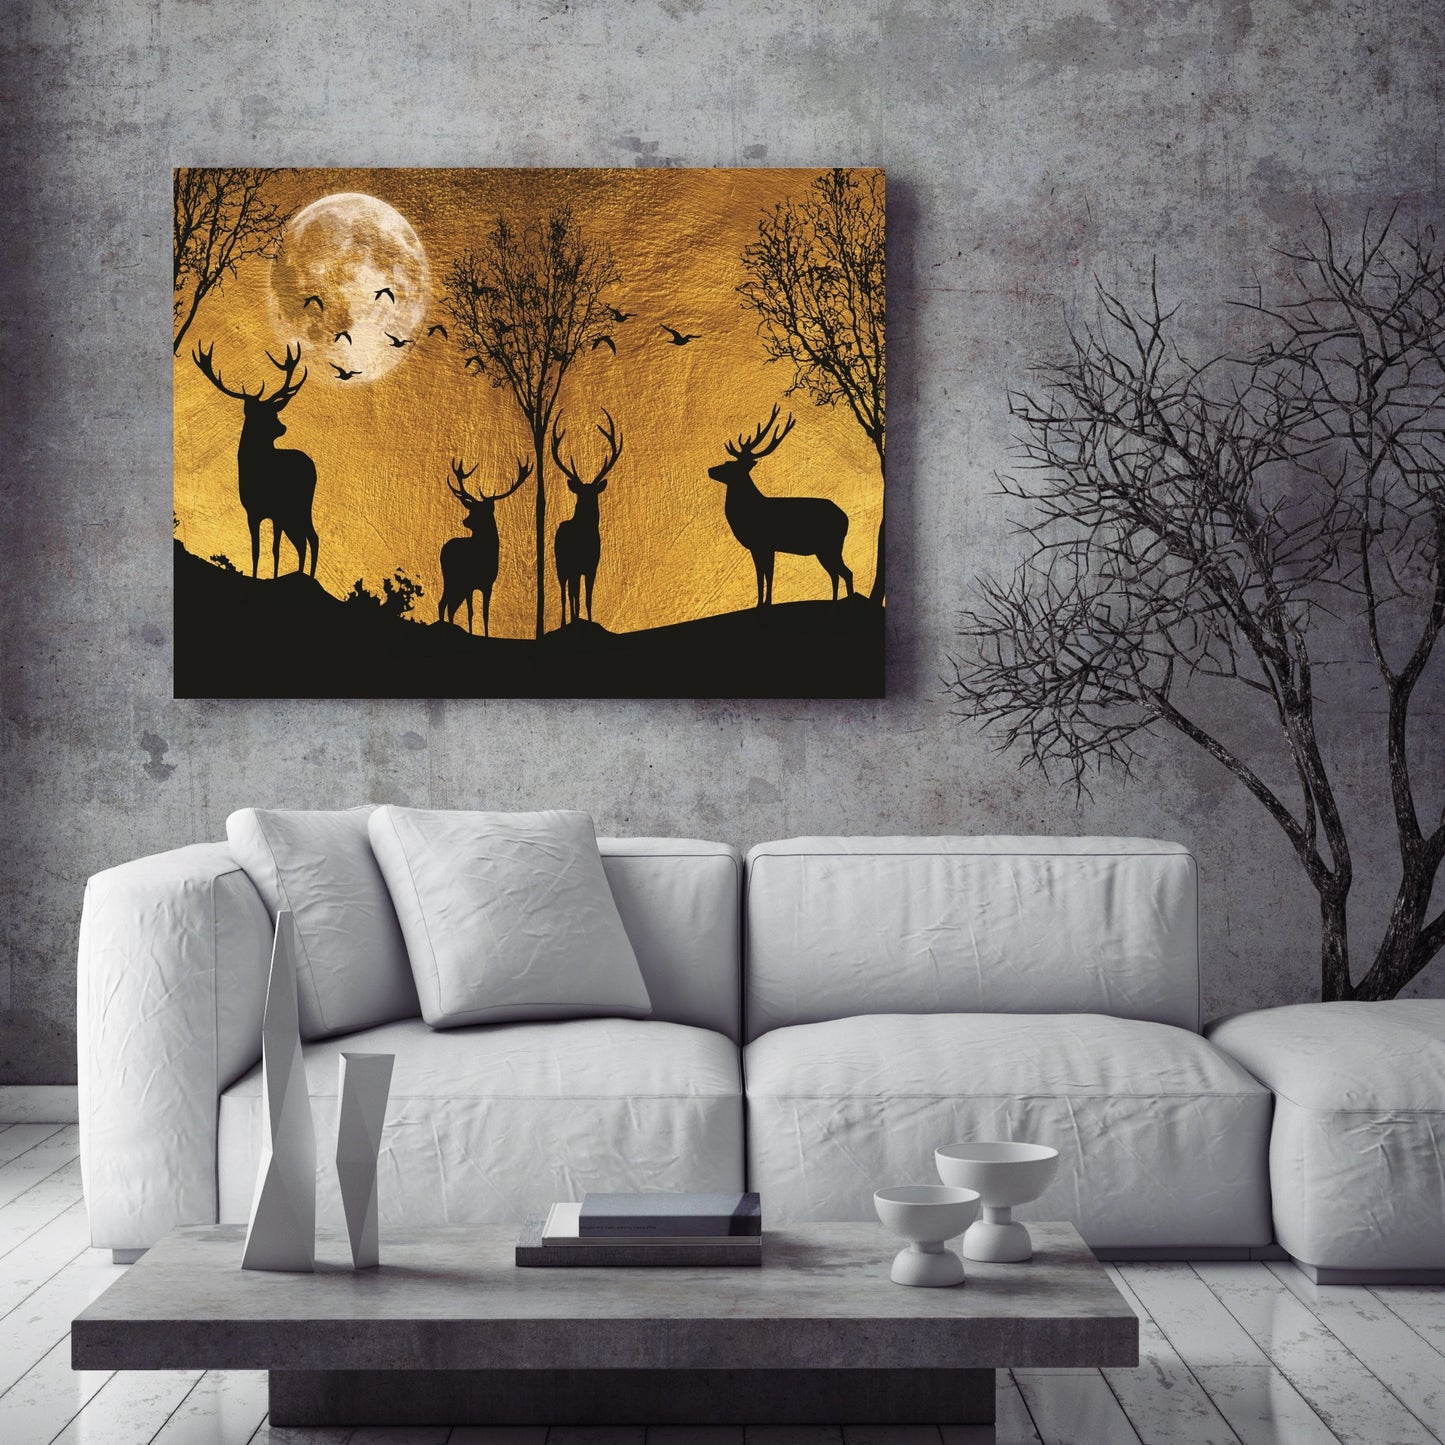 Oriental style Painting of 3 deer in forest on gray and gold canvas